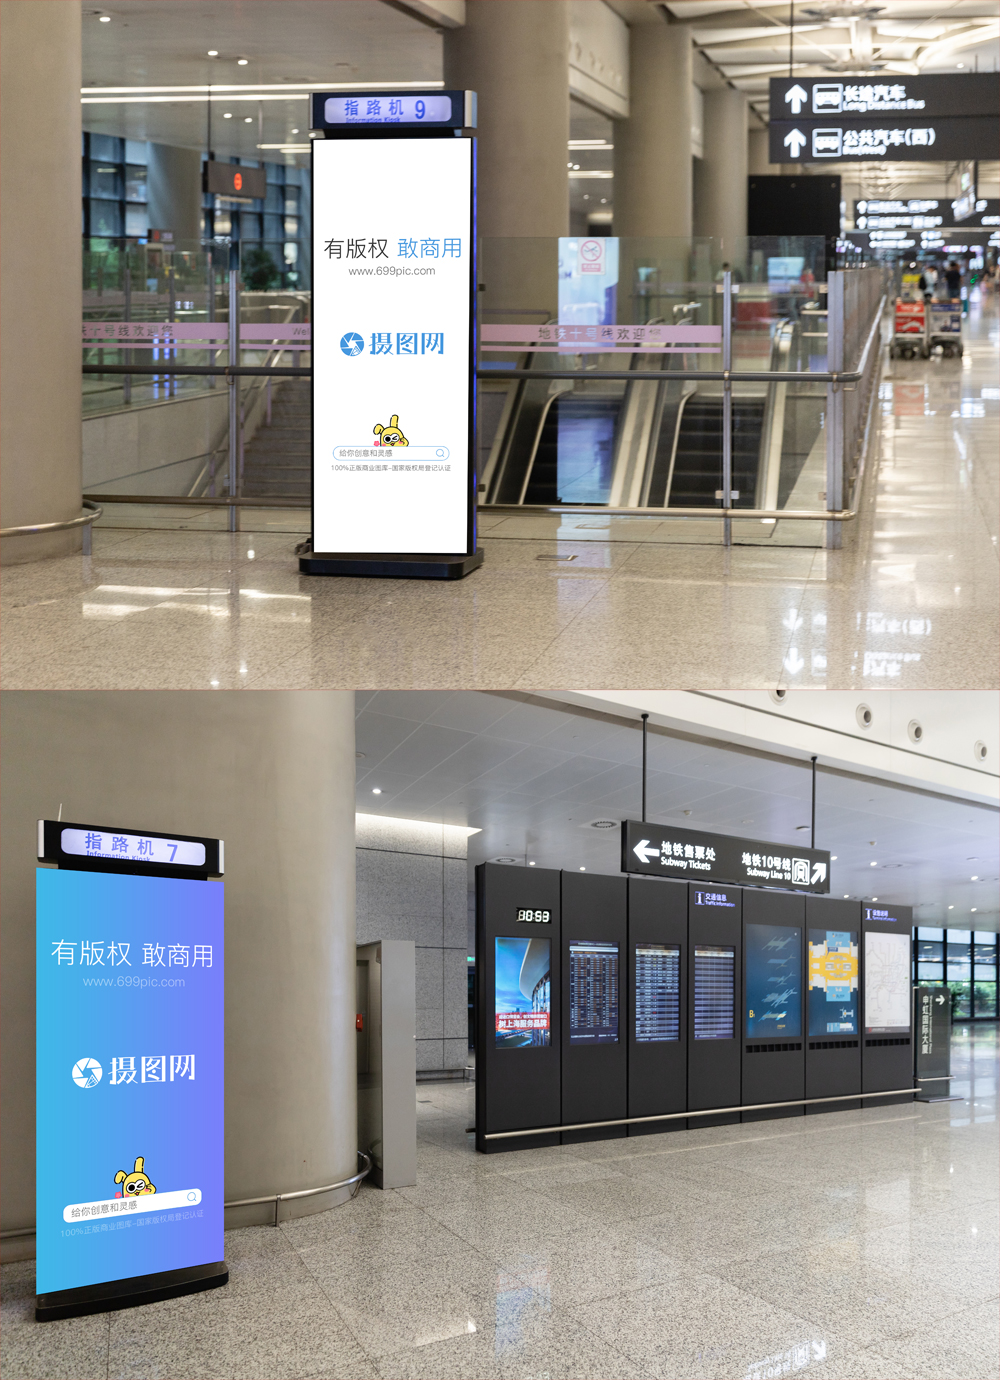 Download Mockup Of Signs And Billboards For Subway Stations Template Image Picture Free Download 400504698 Lovepik Com PSD Mockup Templates